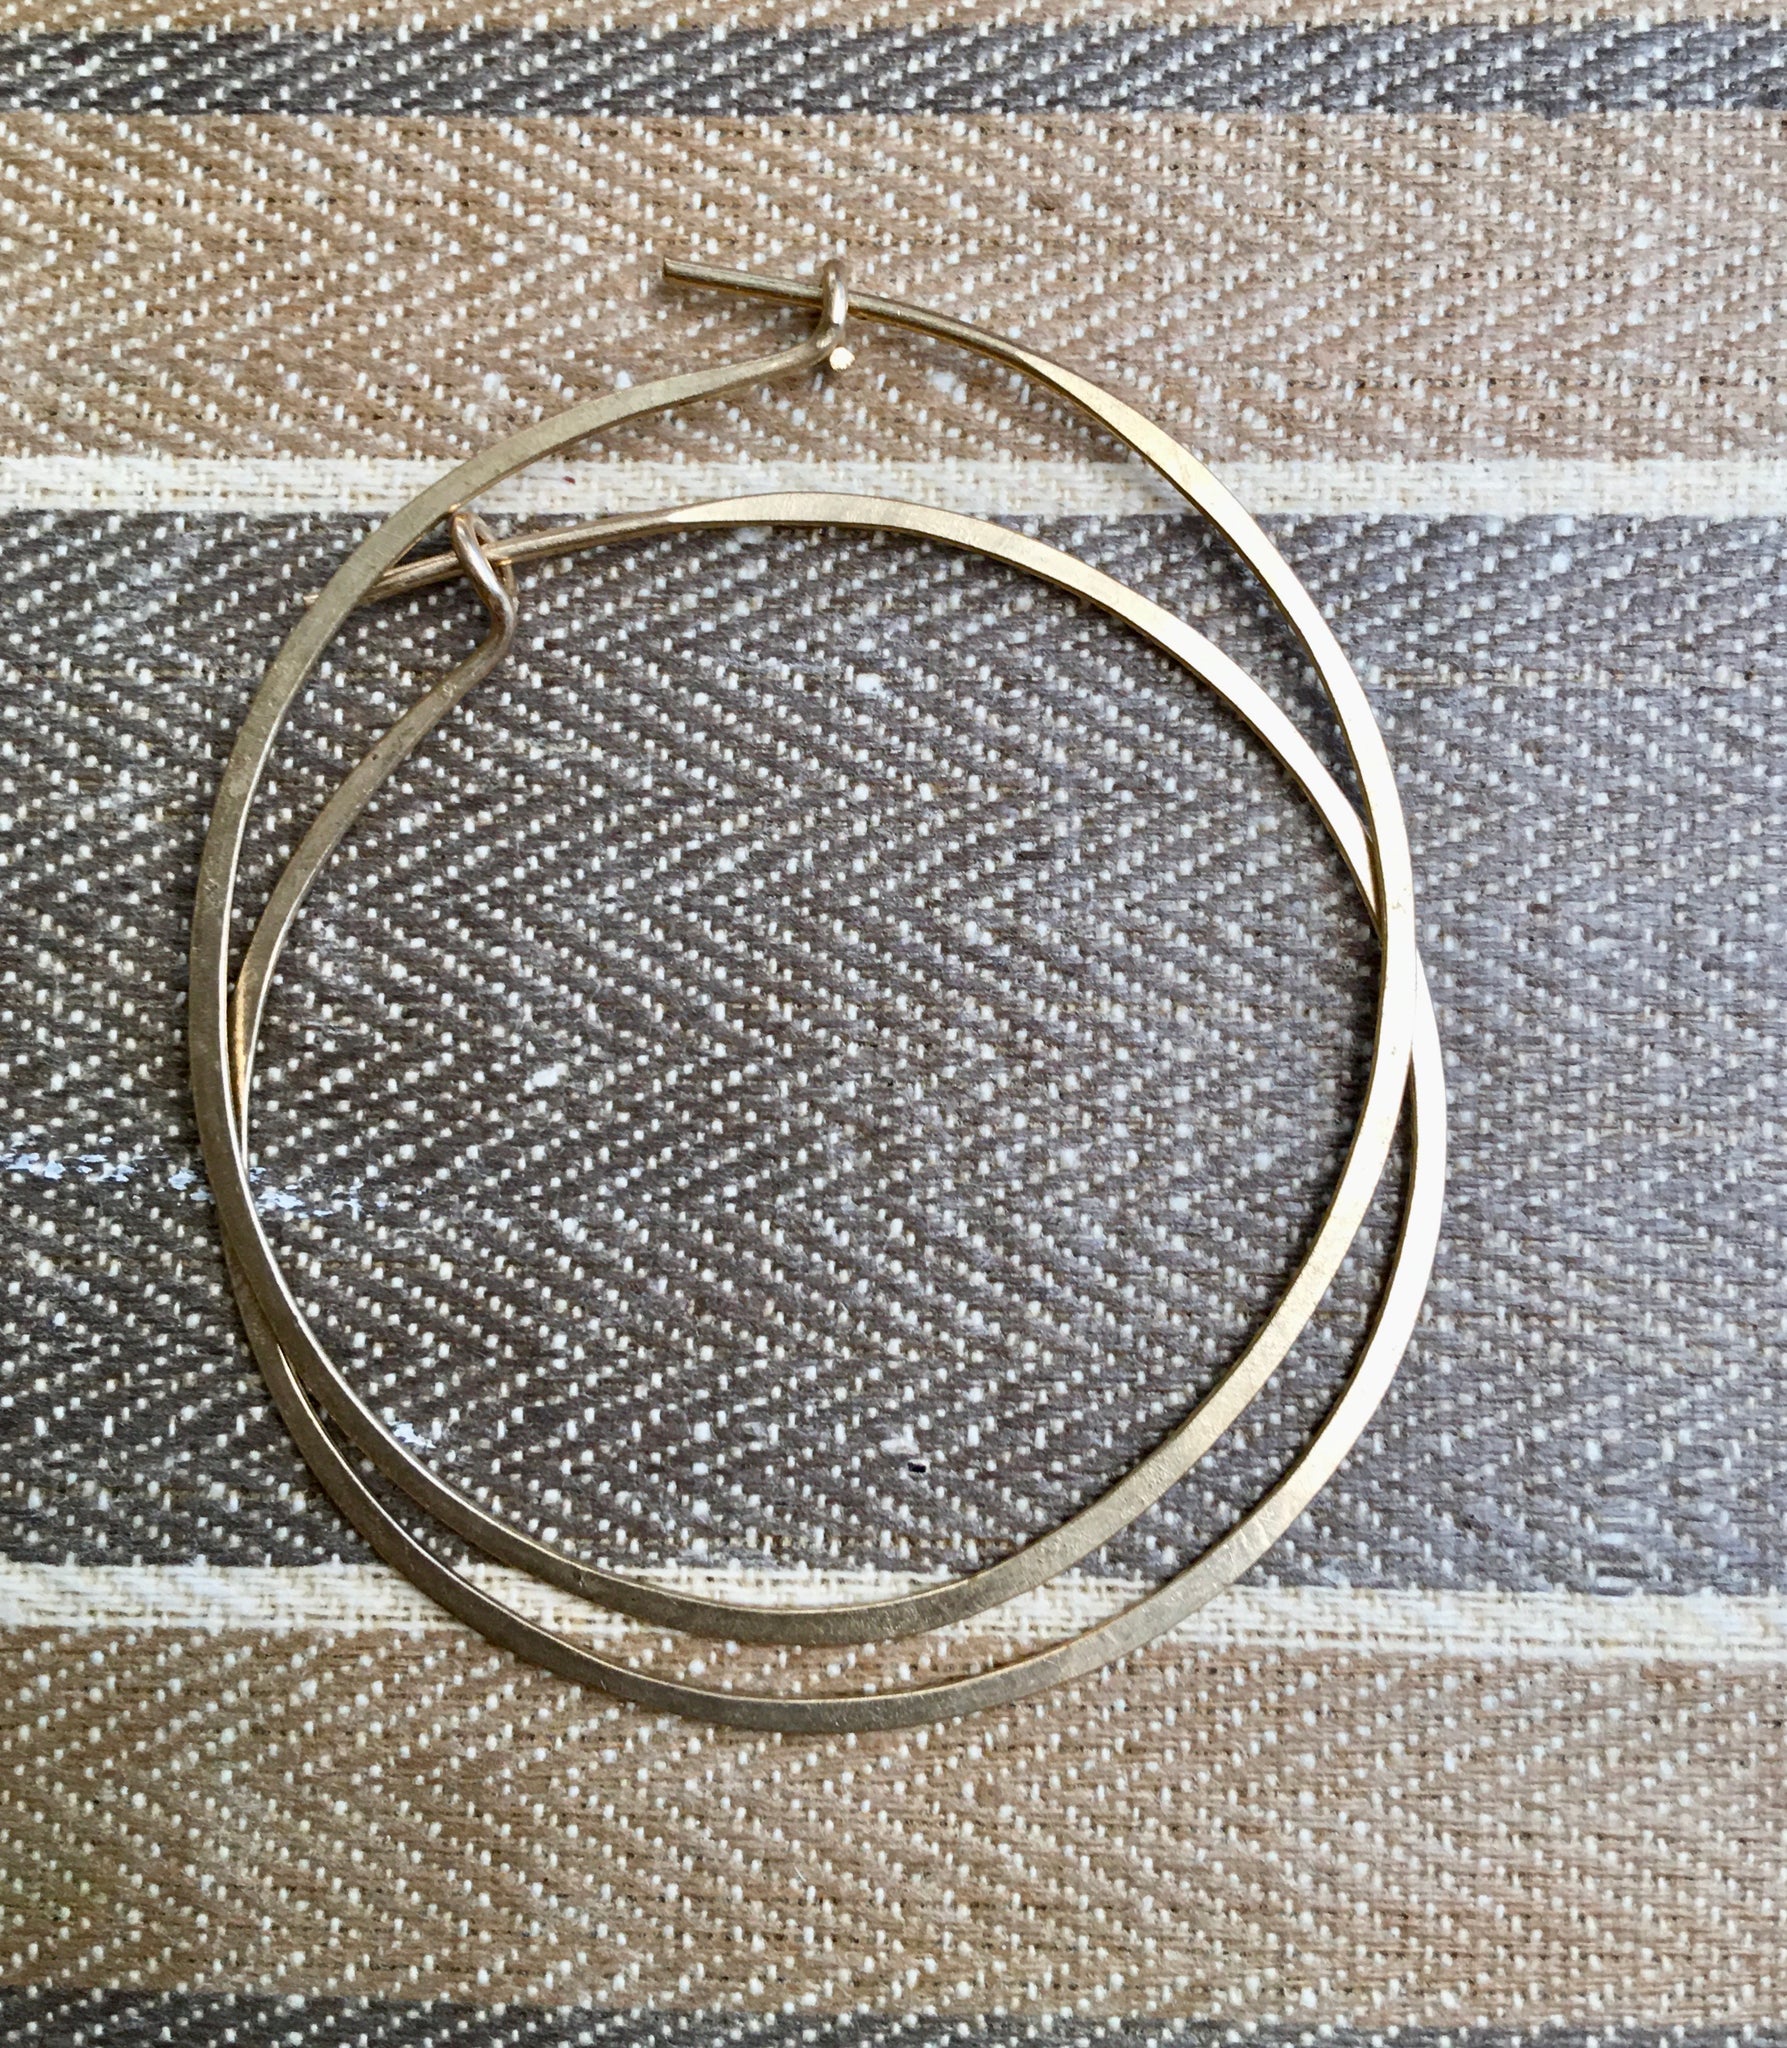 Perfect size round hoops